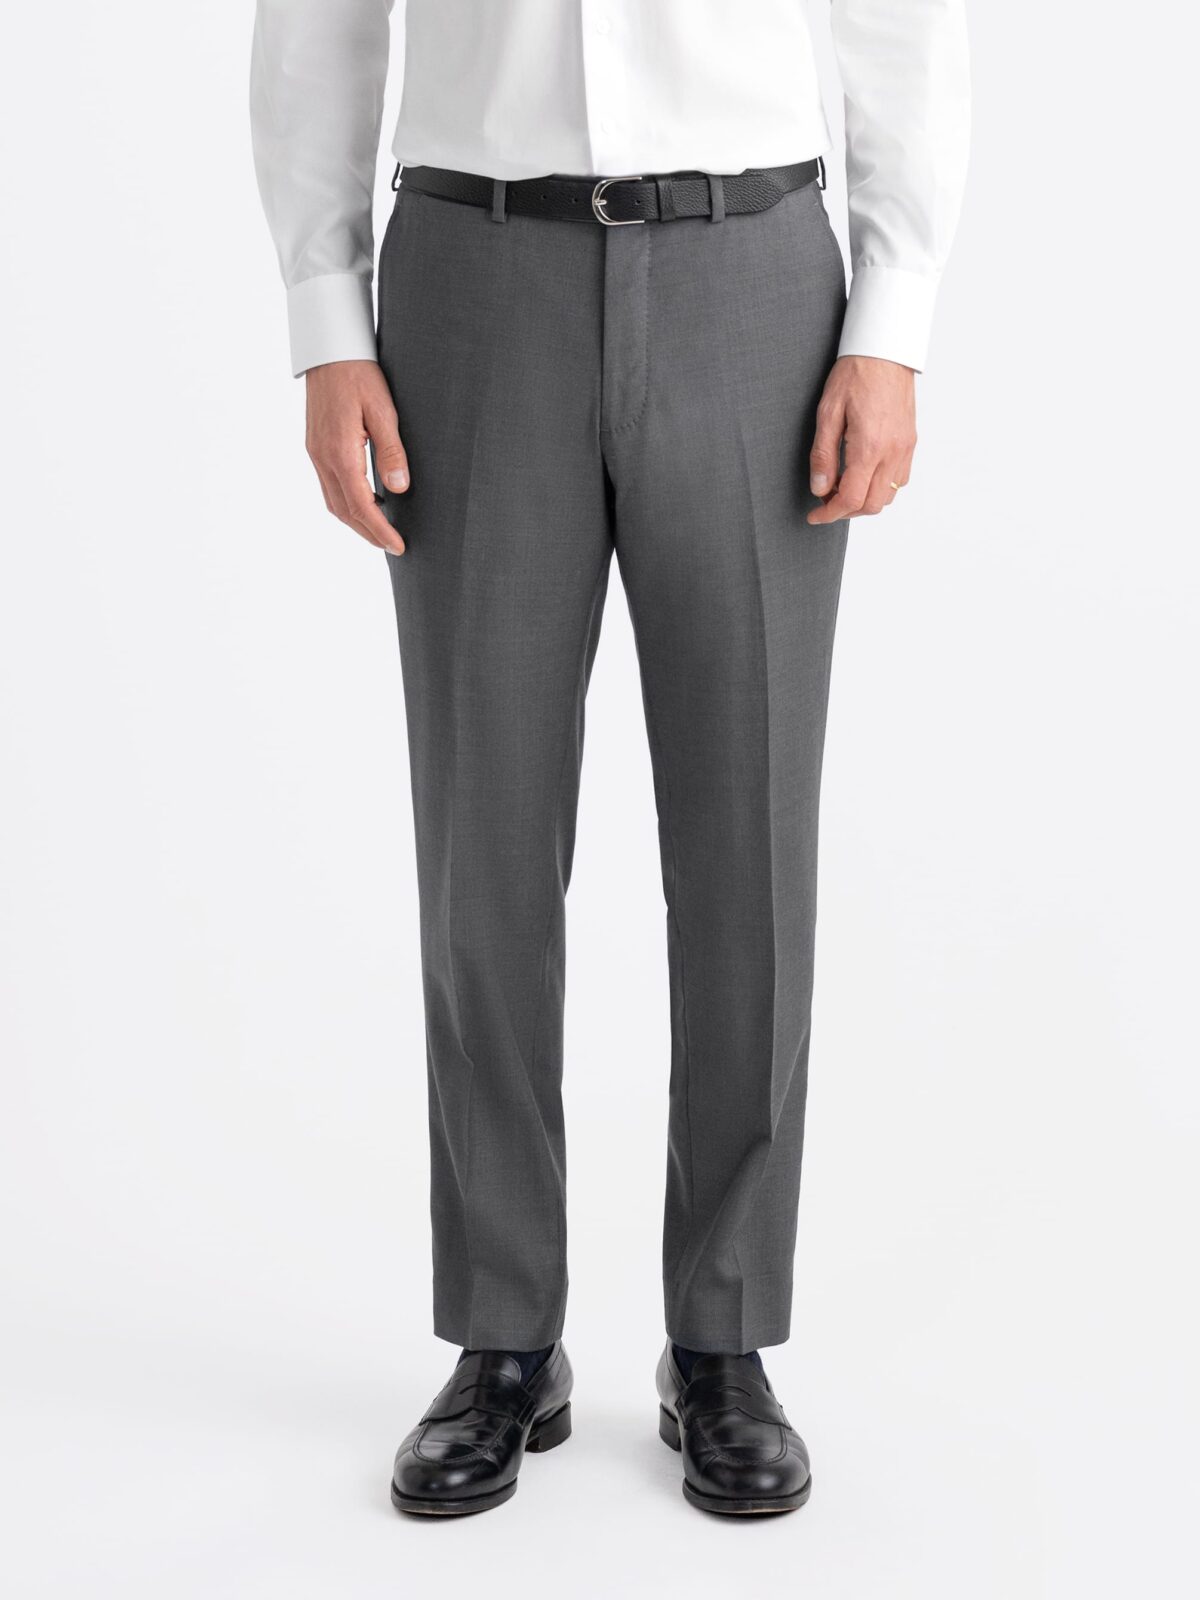 Grey Wool Dress Pant - Custom Fit Tailored Clothing